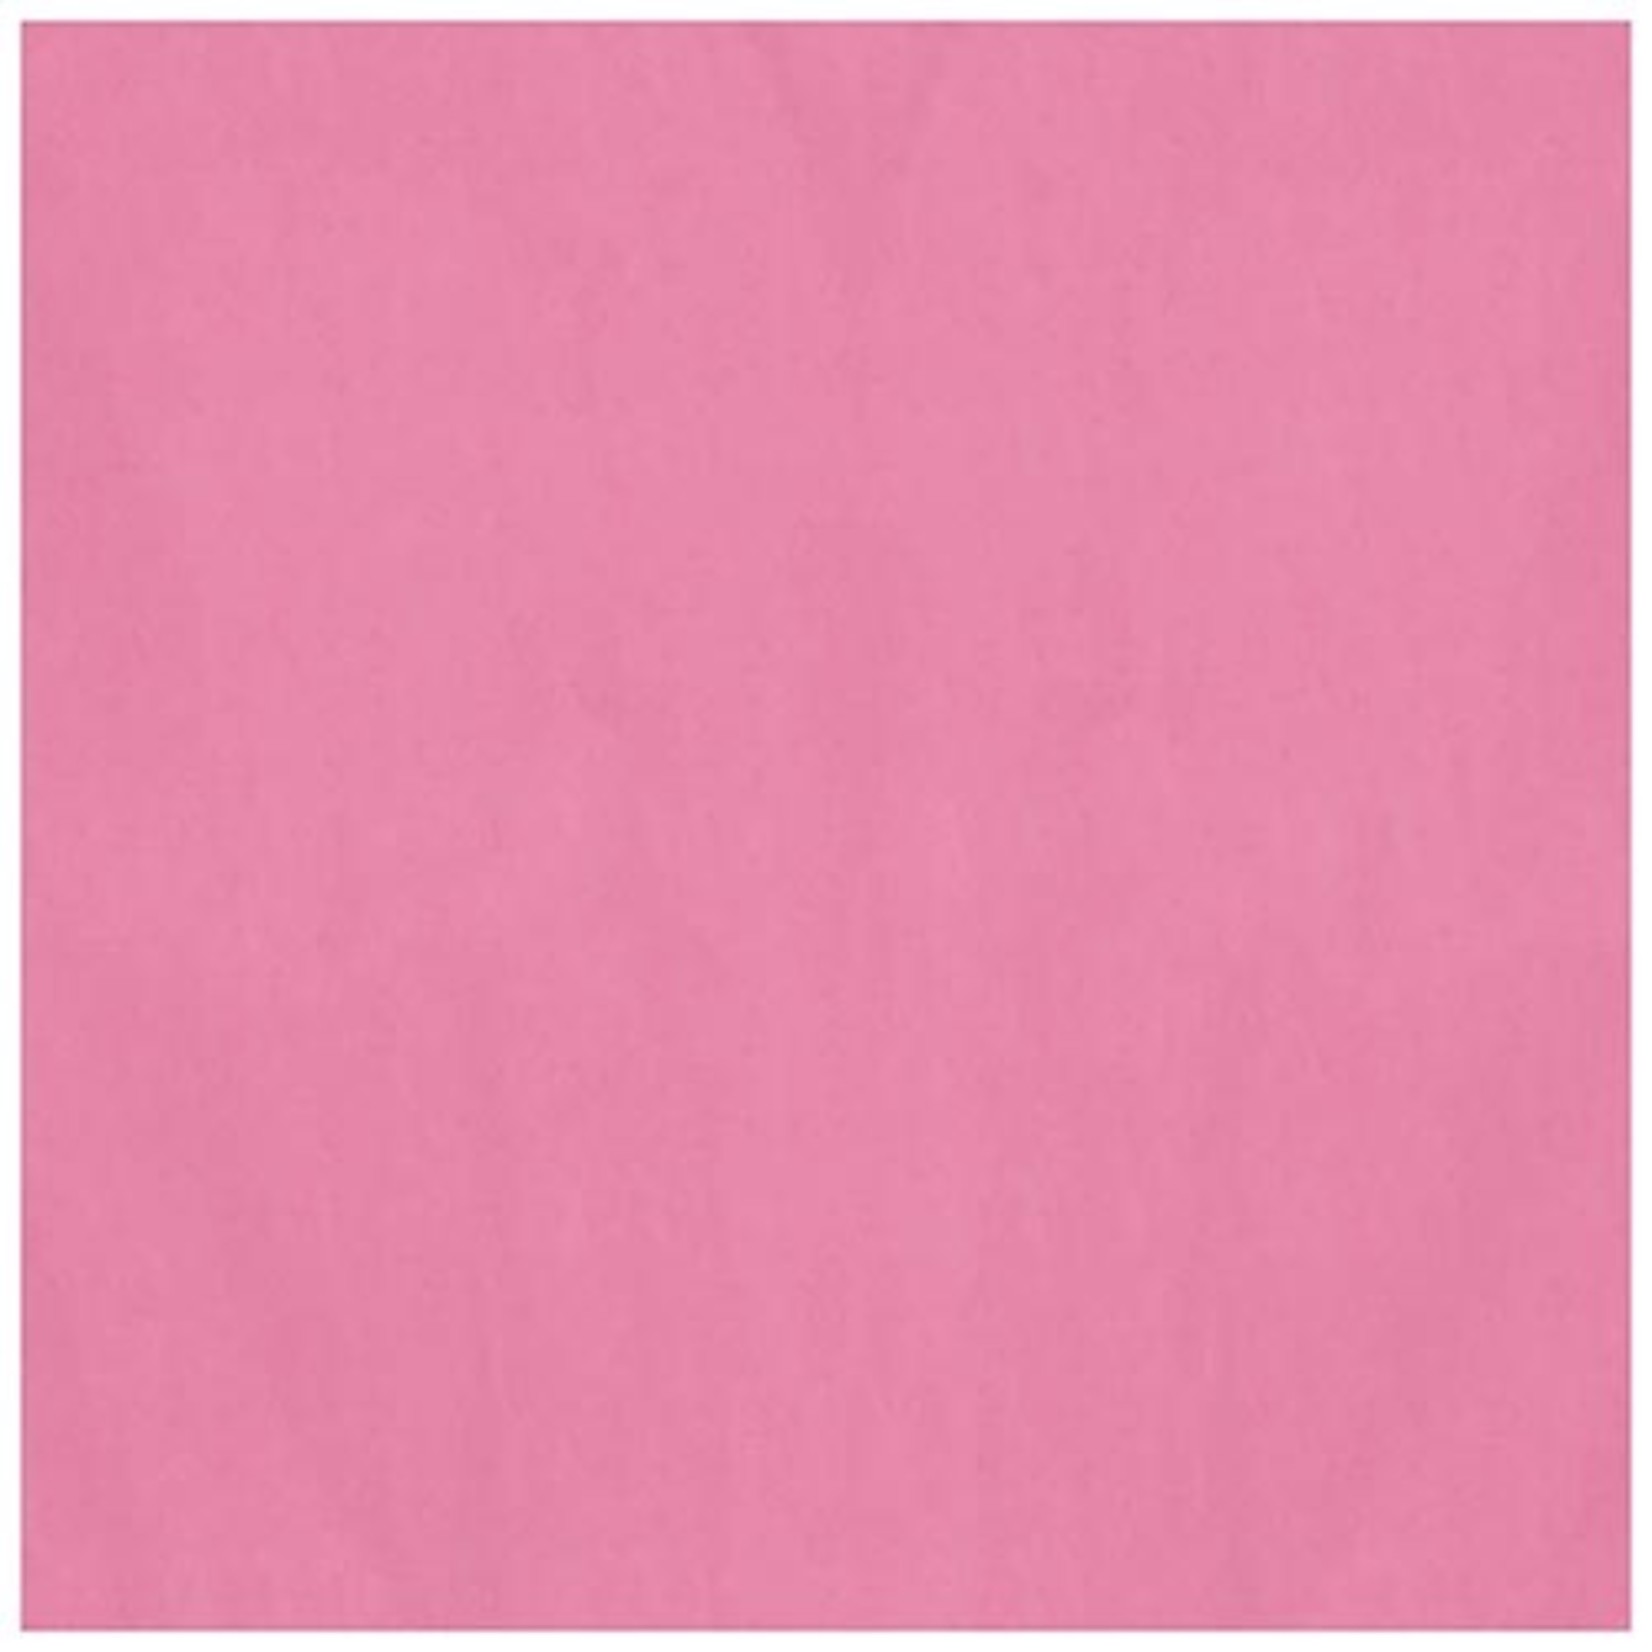 Amscan Pink Tissue Paper - 8ct. (20" x 20")